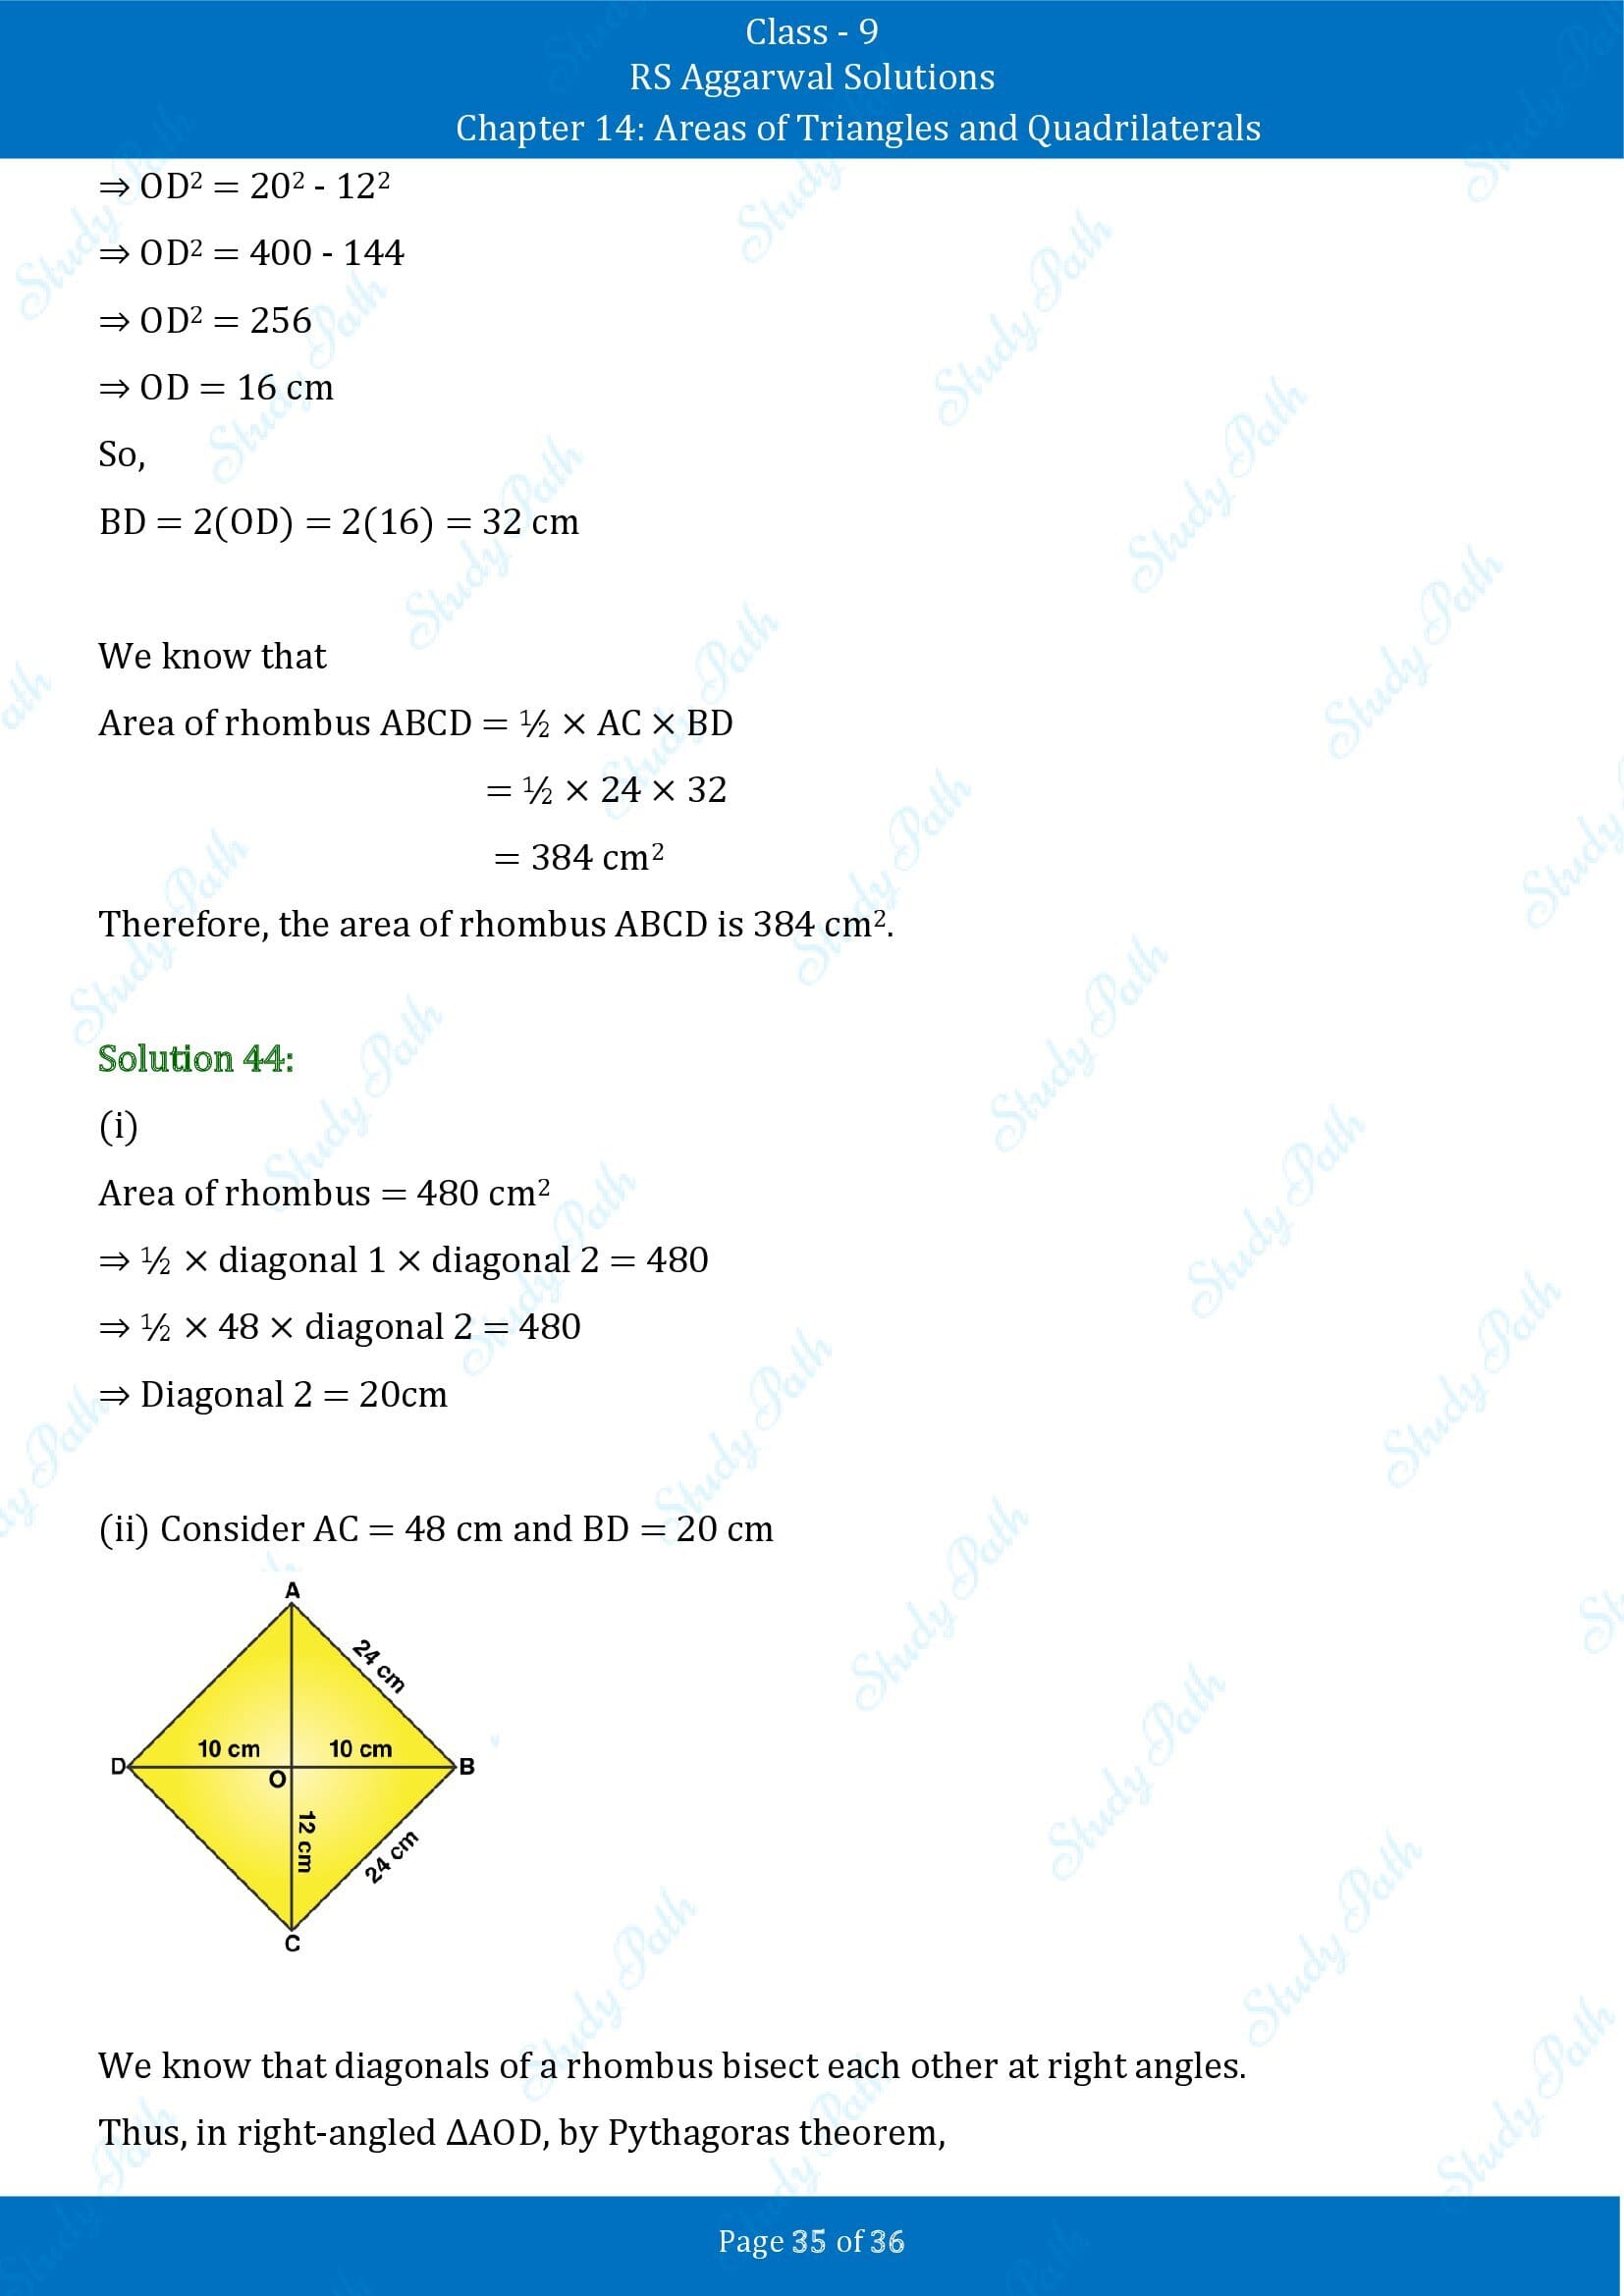 RS Aggarwal Solutions Class 9 Chapter 14 Areas of Triangles and Quadrilaterals Exercise 14 00035